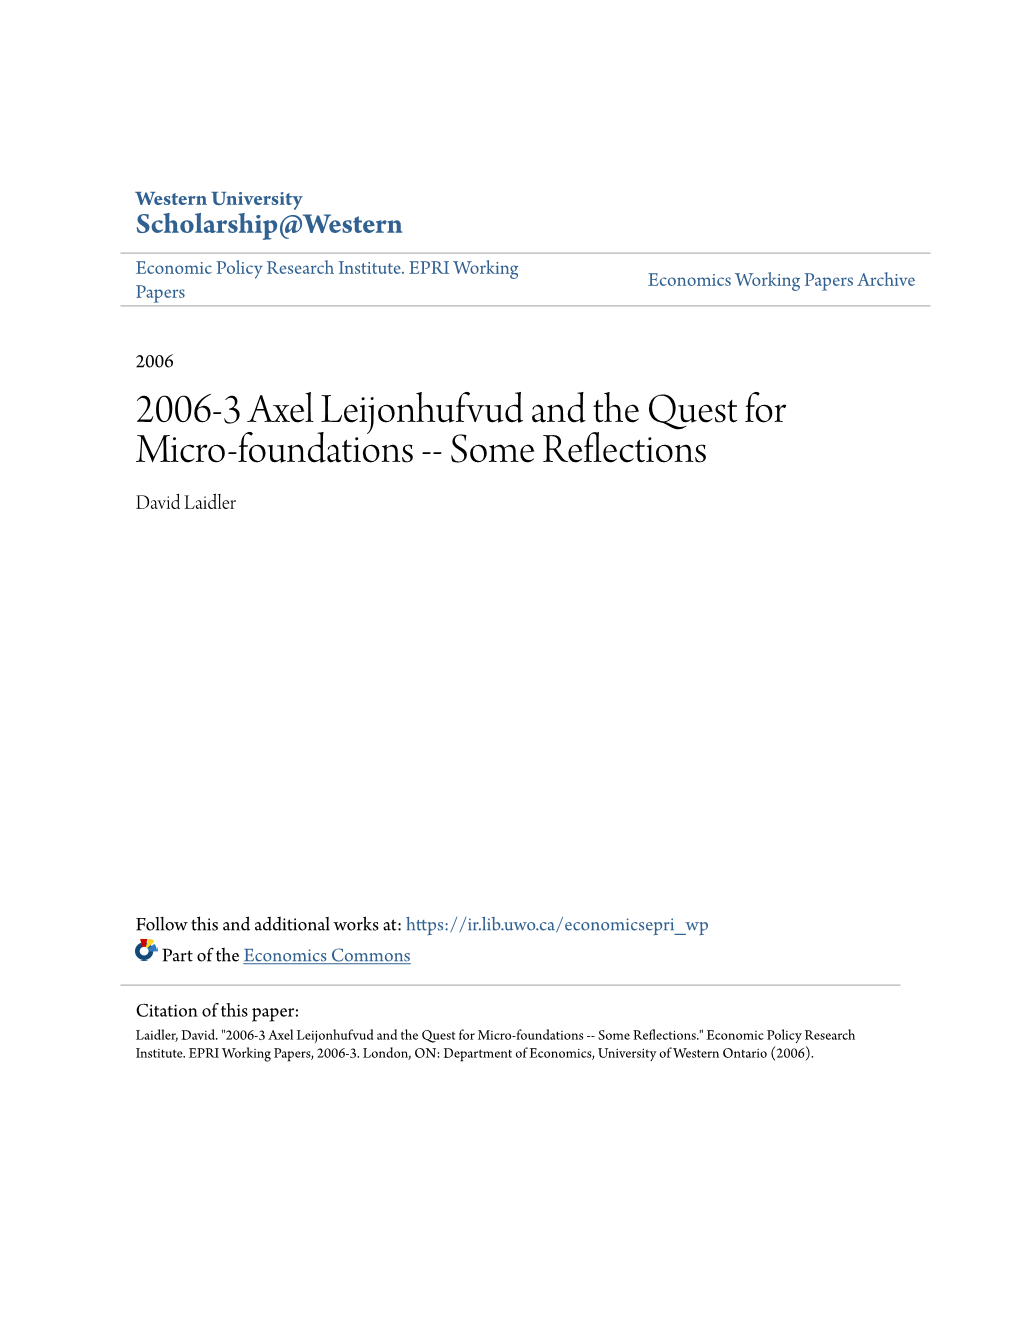 2006-3 Axel Leijonhufvud and the Quest for Micro-Foundations -- Some Reflections David Laidler